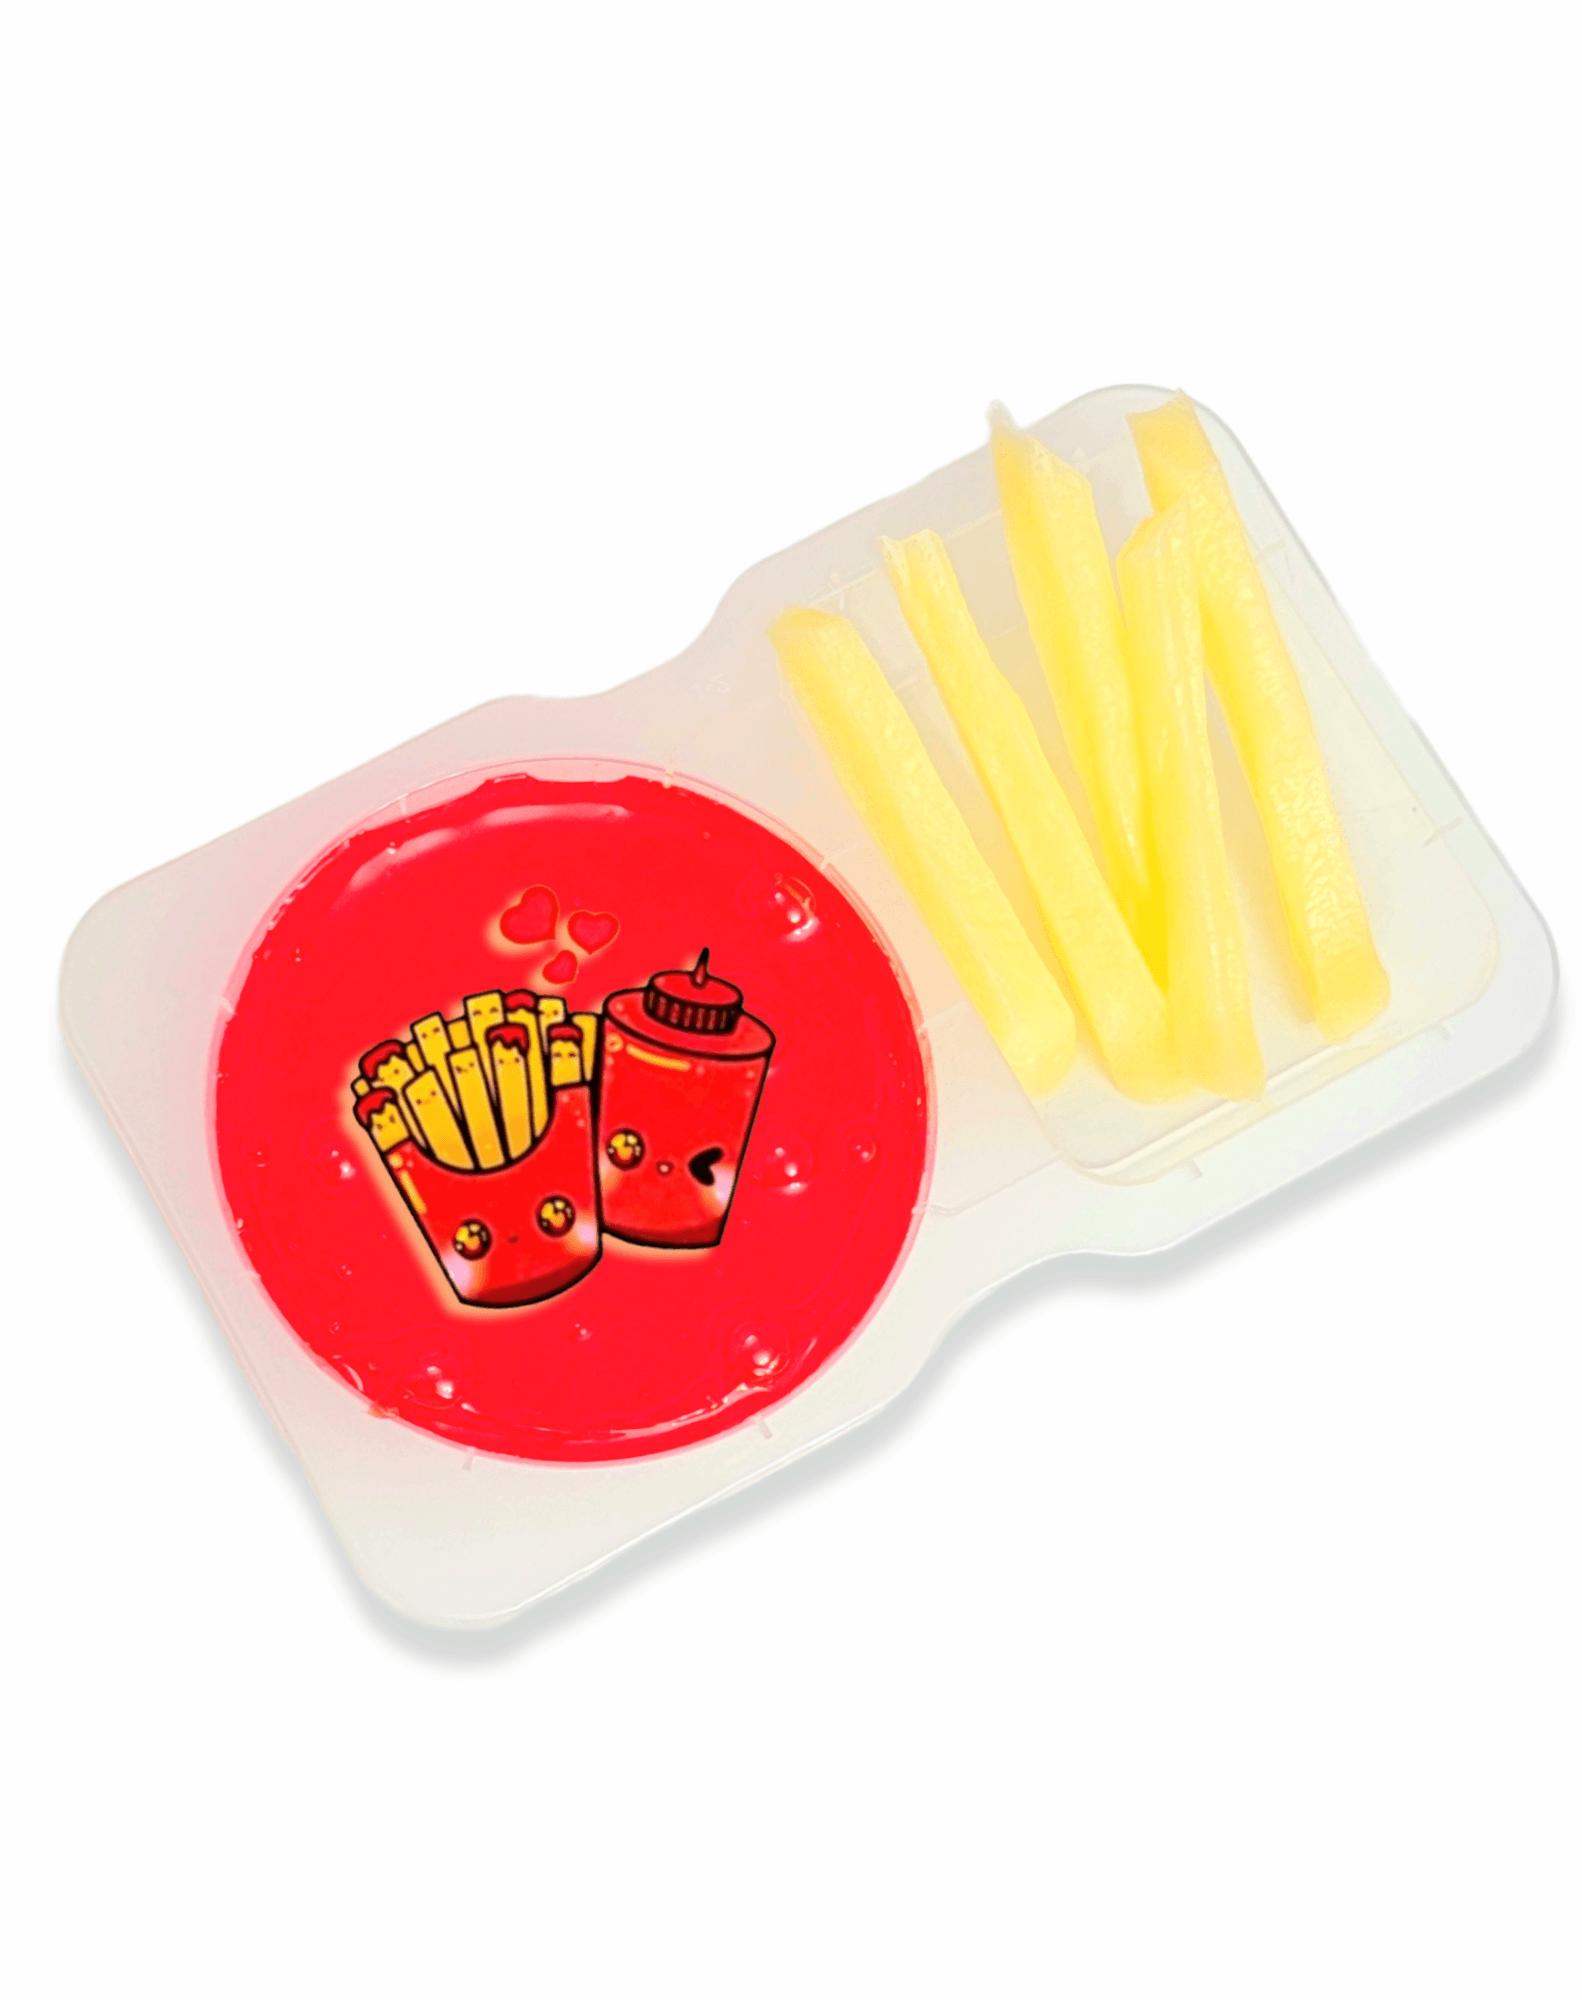 Fries & Ketchup Handmade Clear Scented Slime Slime by Hoshimi Slimes LLC | Hoshimi Slimes LLC